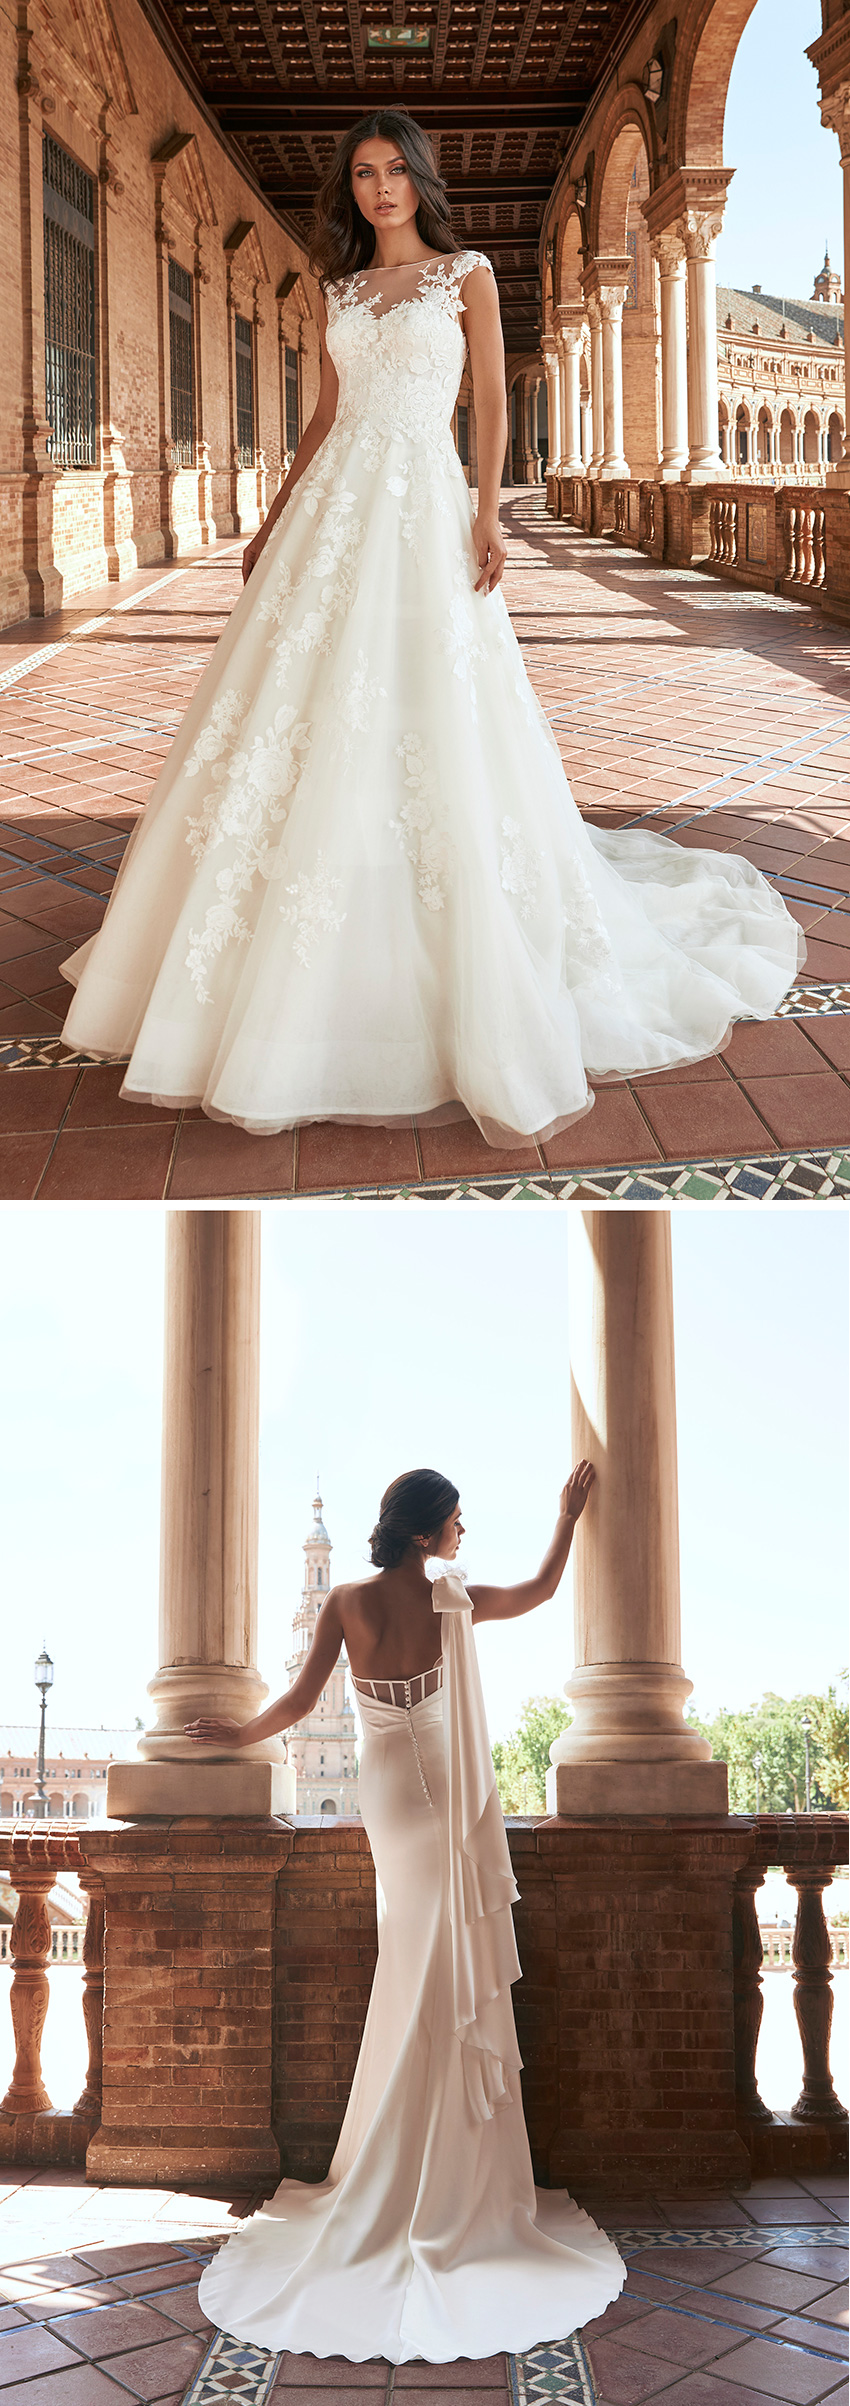 Marchesa for Pronovias new bridal collection includes 21 wedding dresses Perfect Wedding Magazine